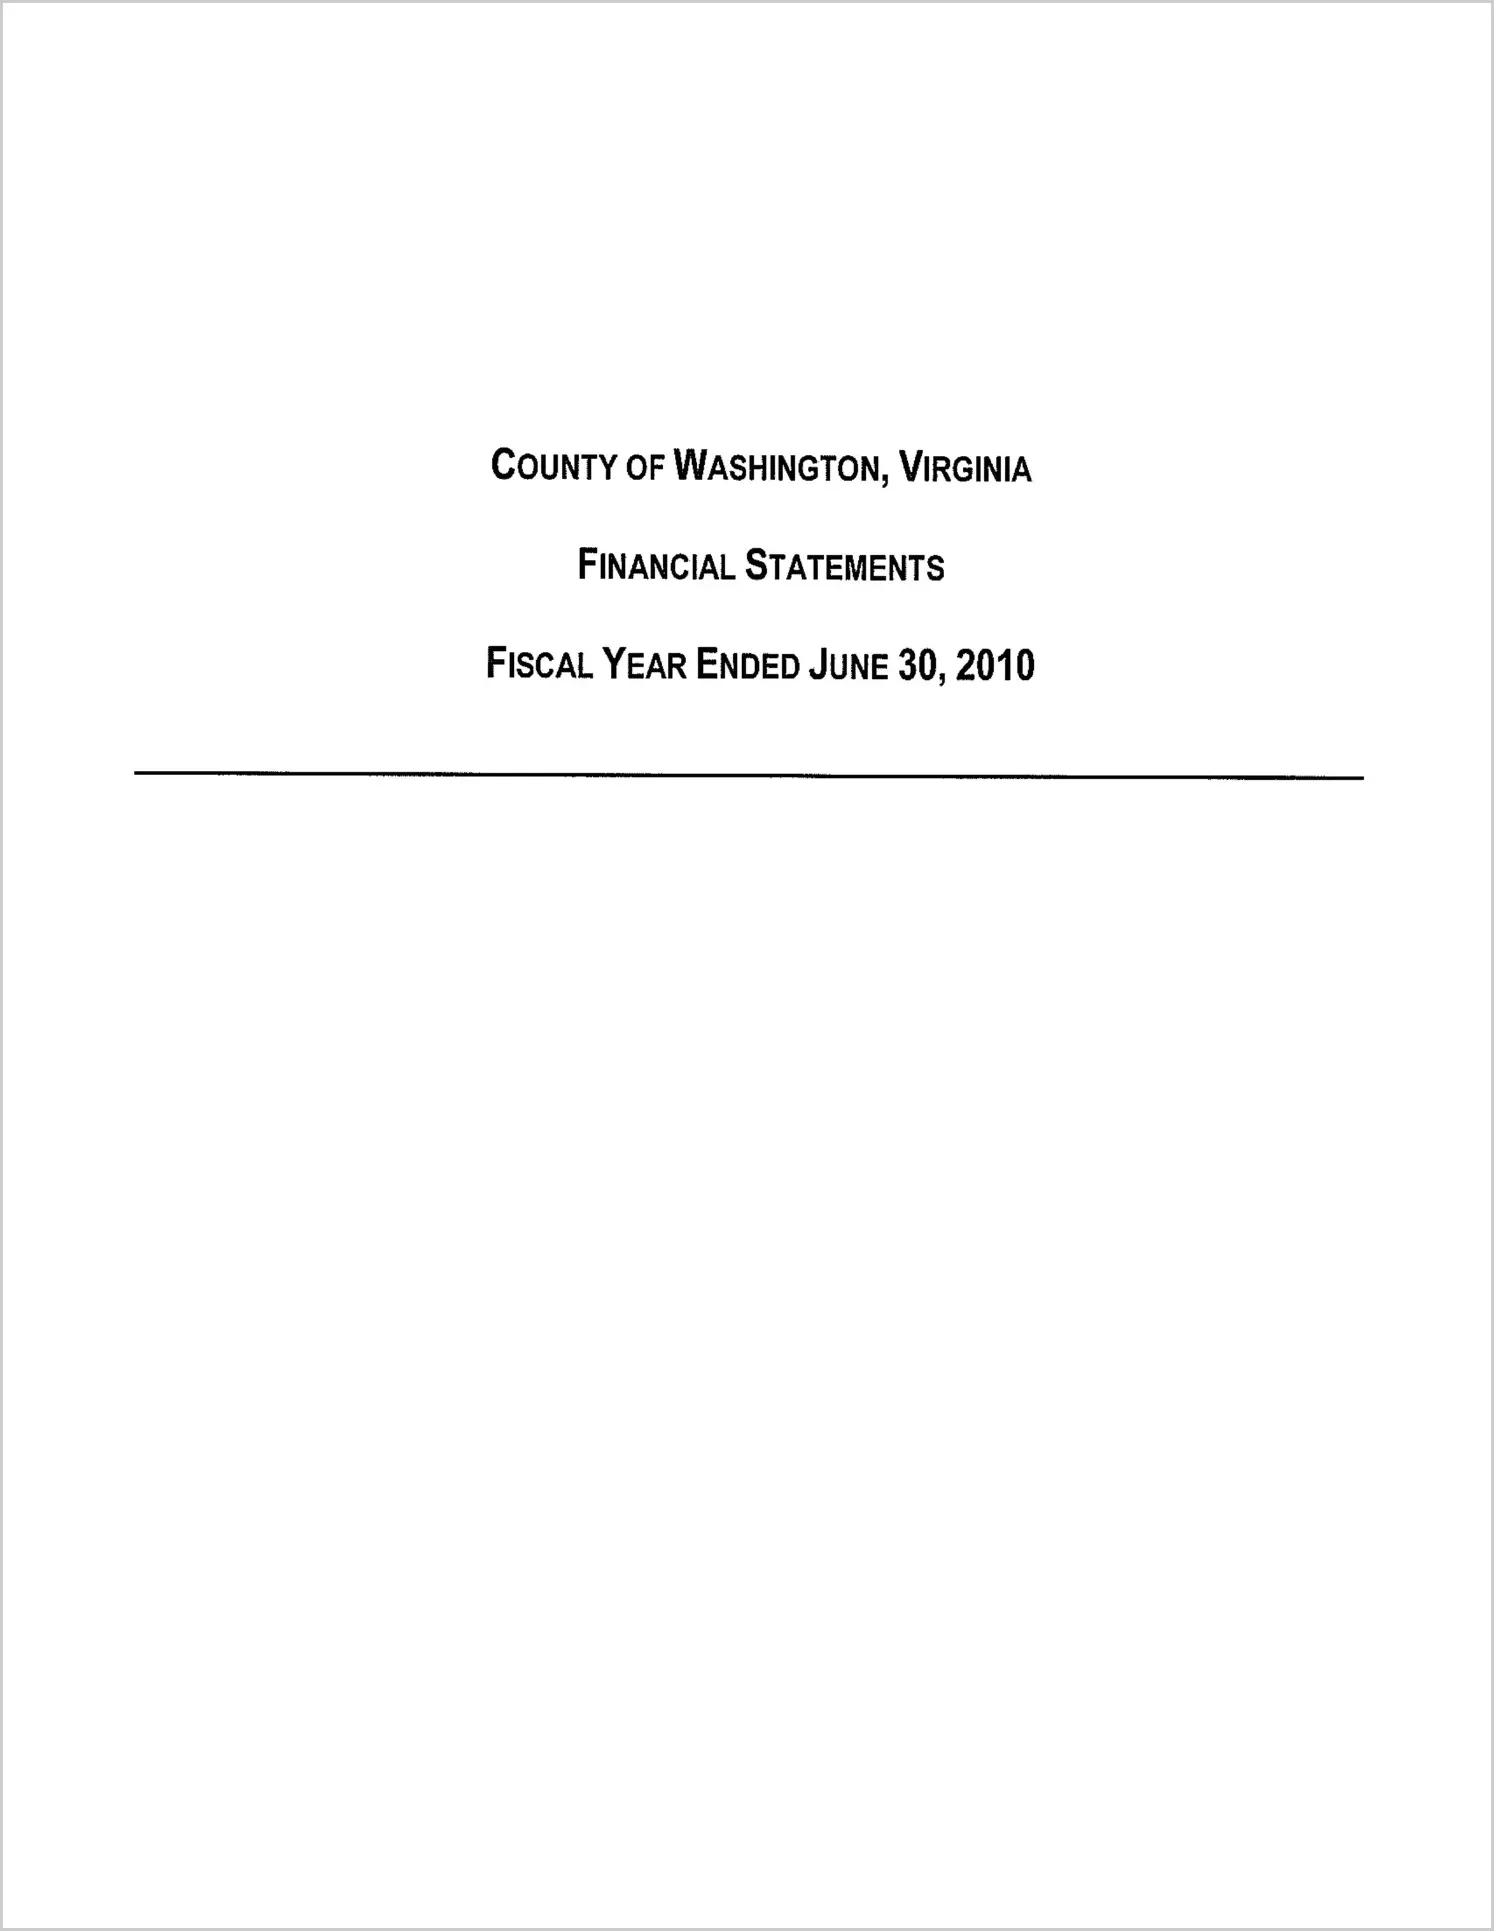 2010 Annual Financial Report for County of Washington